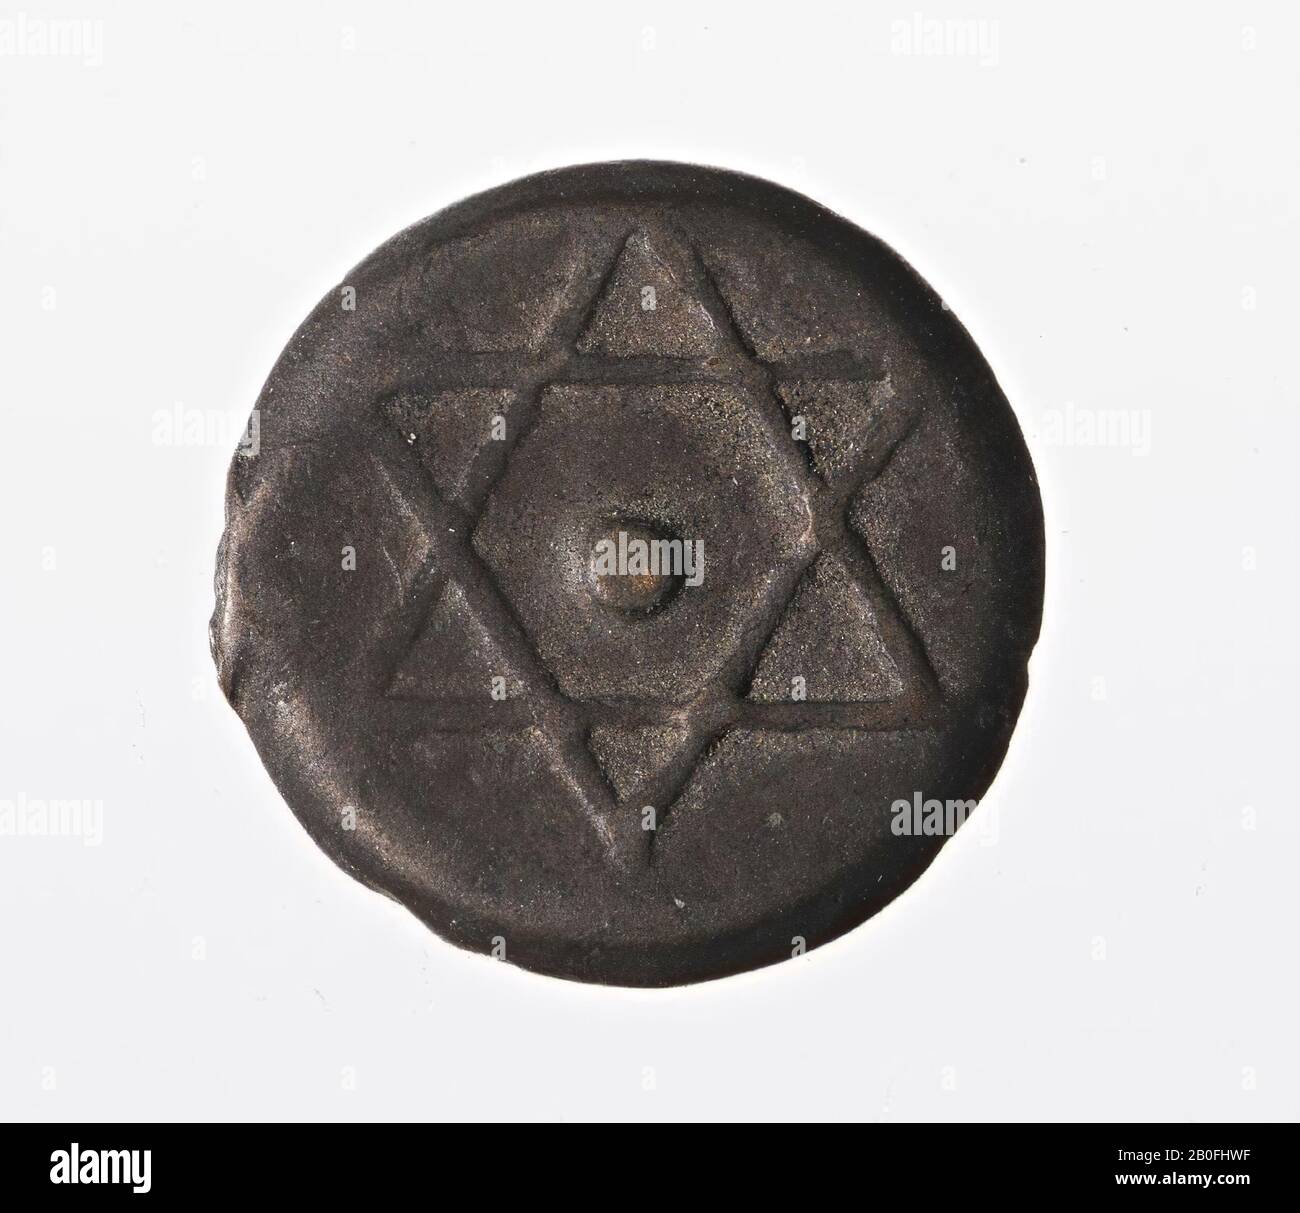 Bronze coin with on the front two intersecting equilateral triangles (Star of David), on the reverse side a name in Arabic and the year 1278 (ca. 1861 AD)., Coin, falus, Morocco, metal, bronze , nt ca. 1861, Morocco Stock Photo